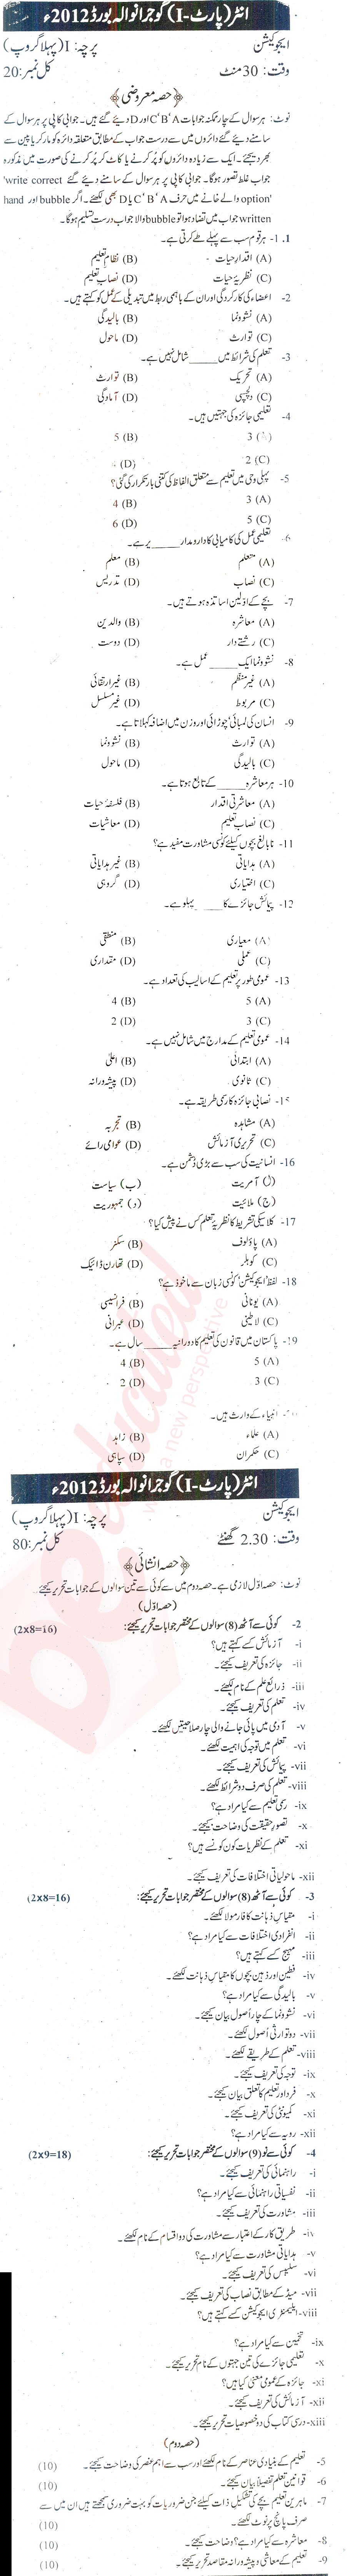 Education FA Part 1 Past Paper Group 1 BISE Gujranwala 2012